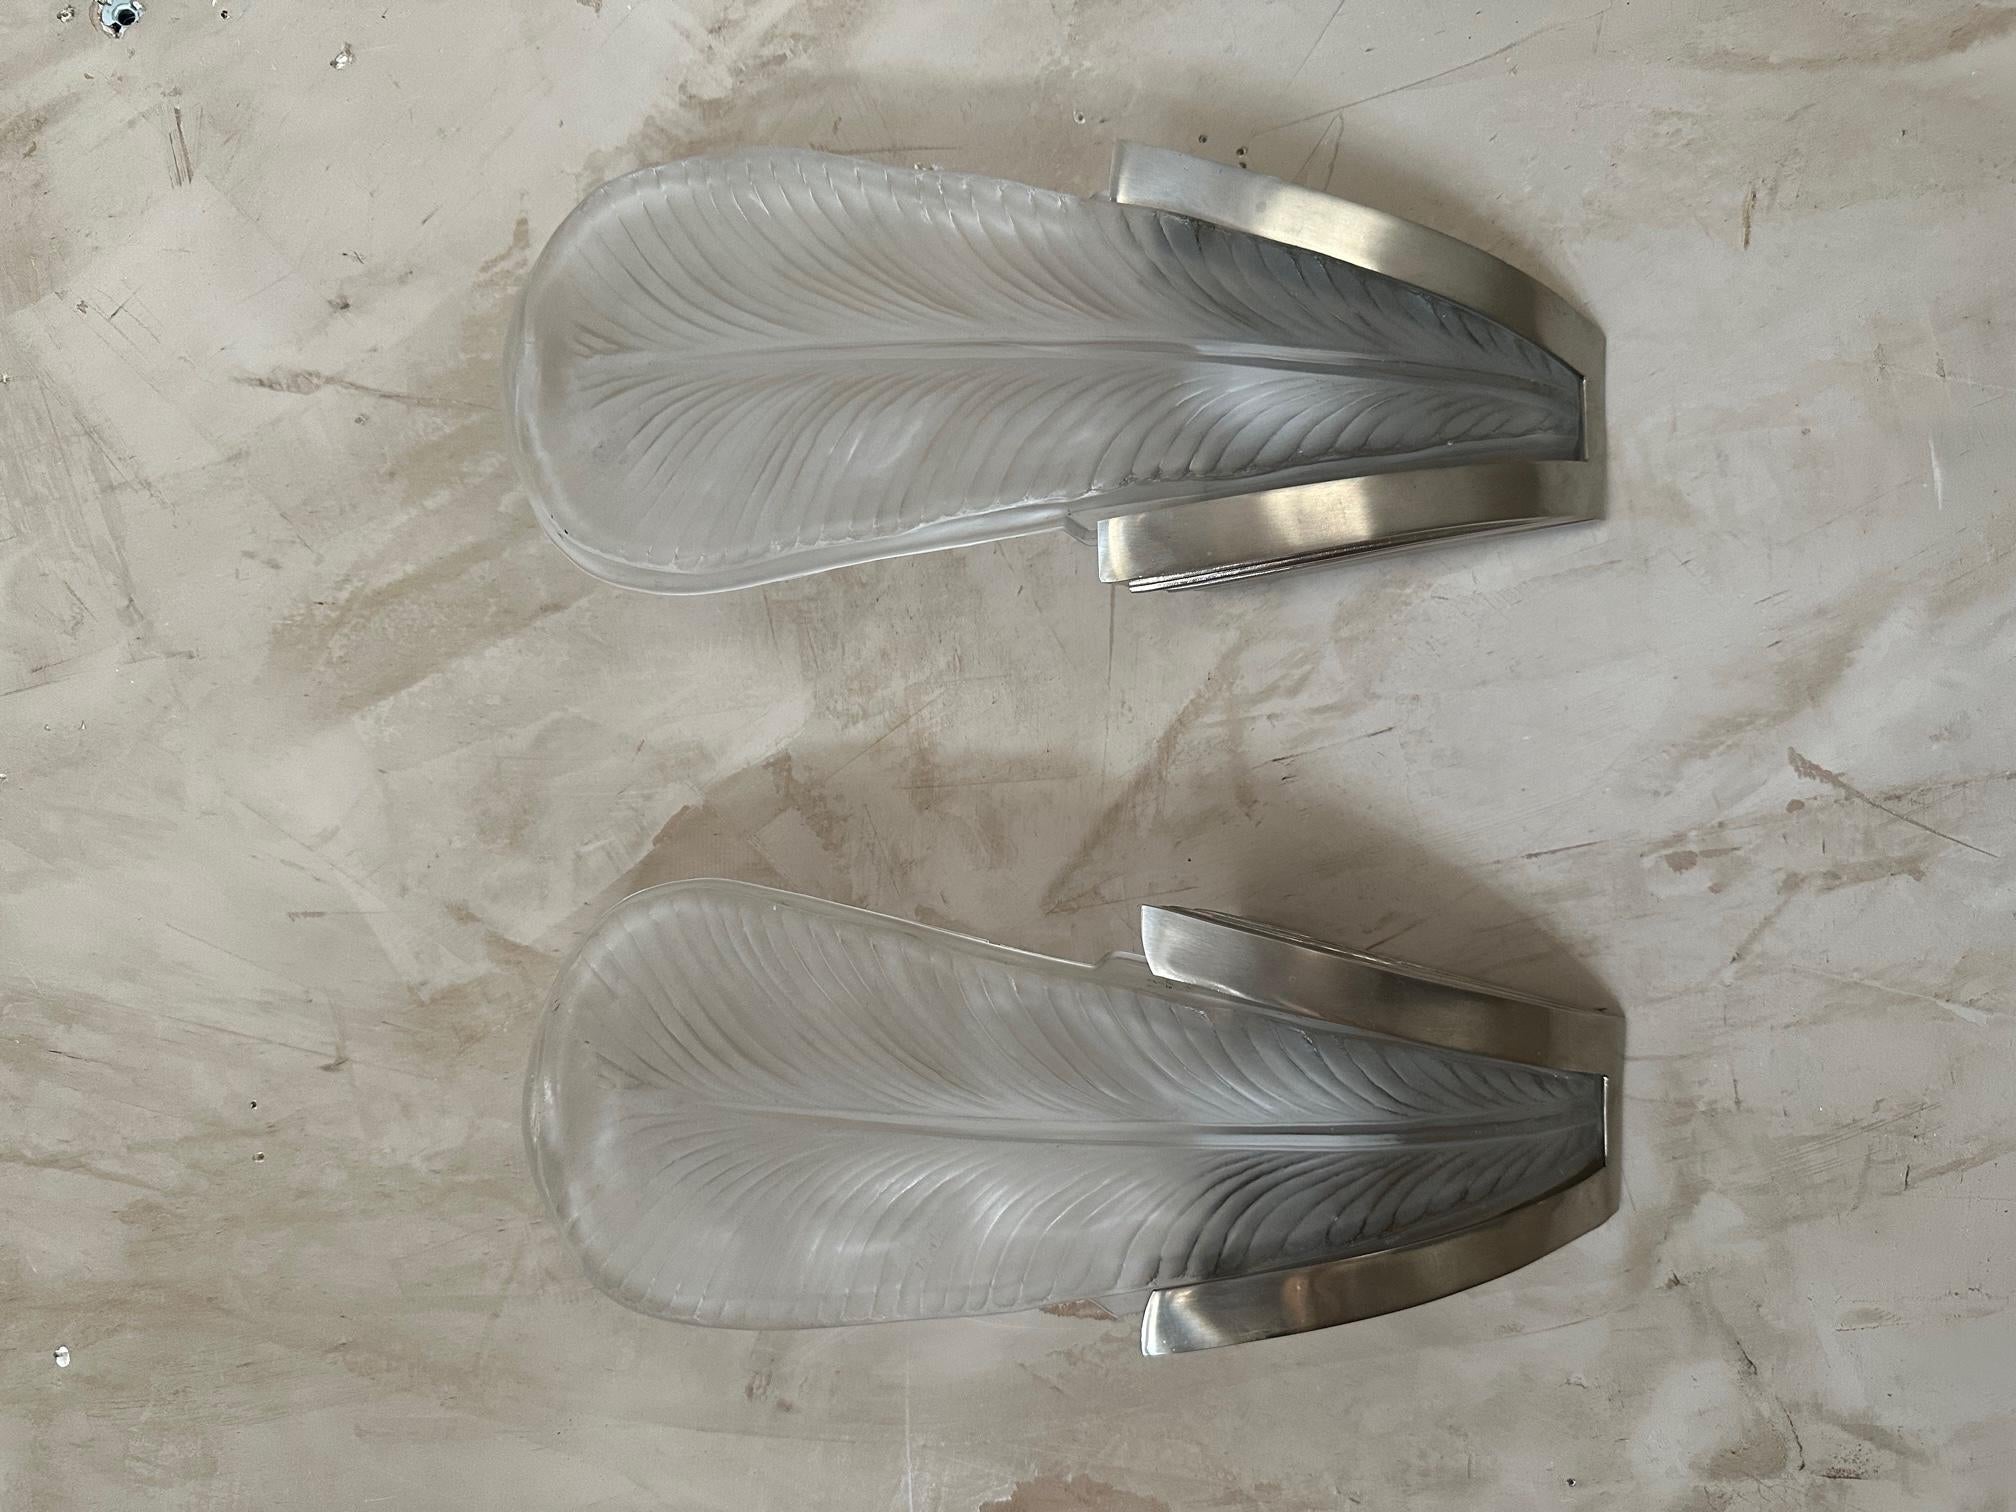 Magnificent pair of art deco wall lights in glass in the shape of a palm. 
Structure in chromed metal engraved with a graphic pattern typical of the 1930s.
Very good condition and superb quality. Ideal in a bathroom or other room.
For lovers of